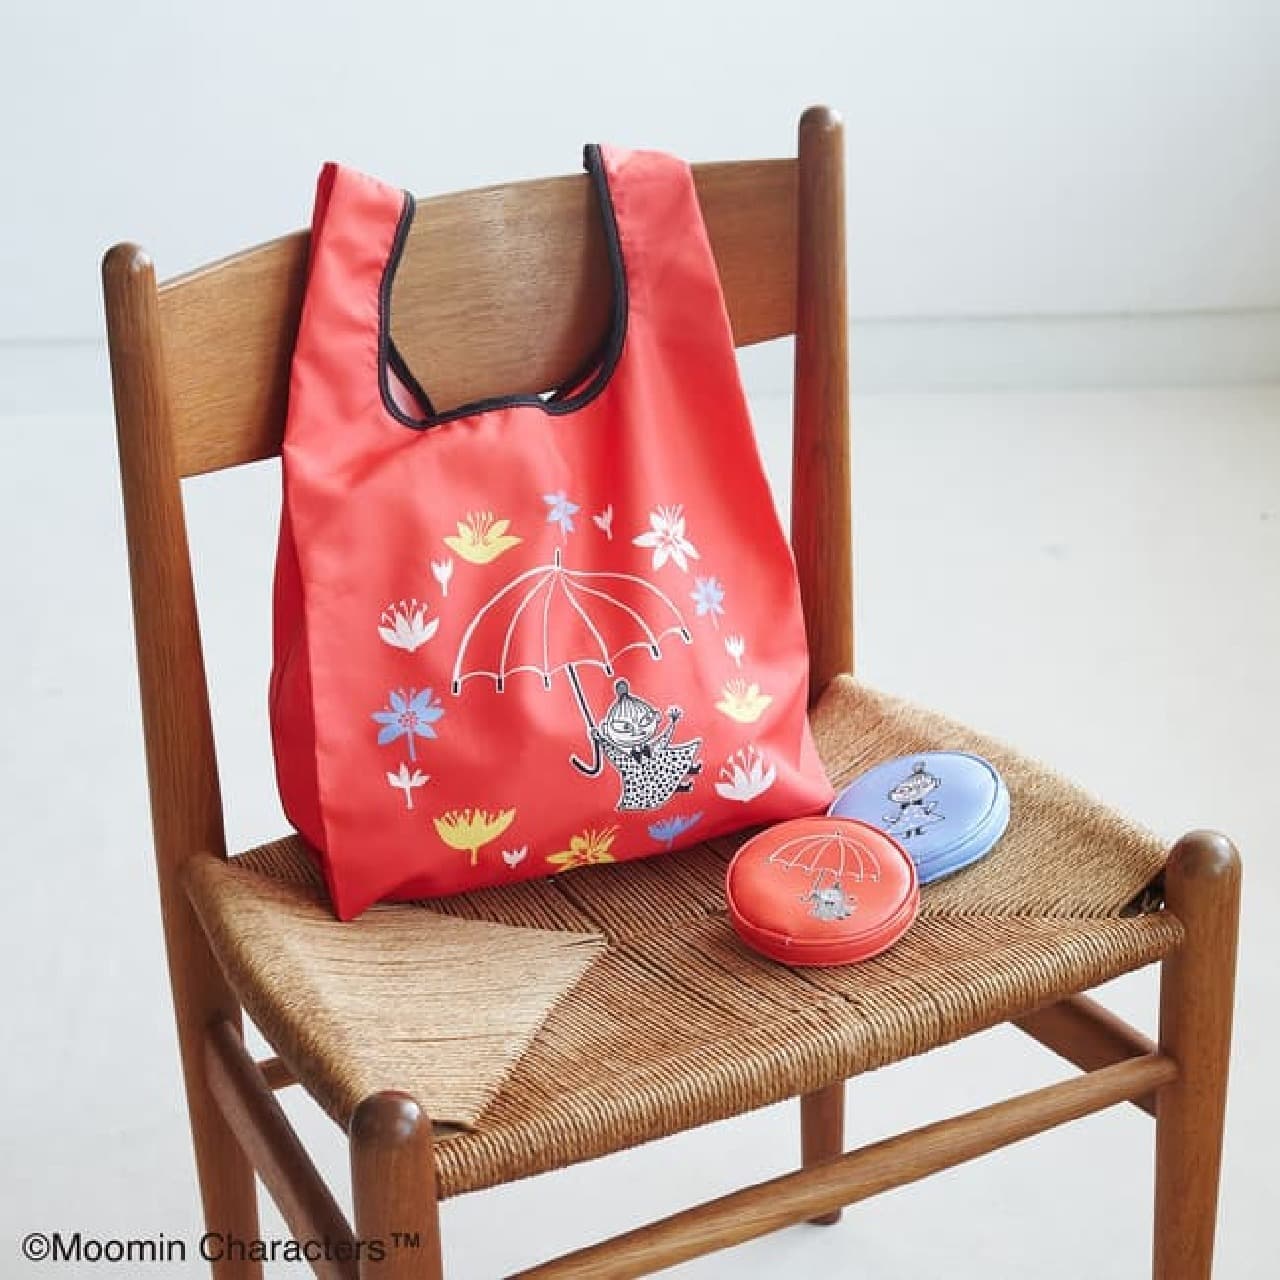 Afternoon Tea LIVING x Moomin collaboration --Little My Mimura Nee's kitchen and interior goods